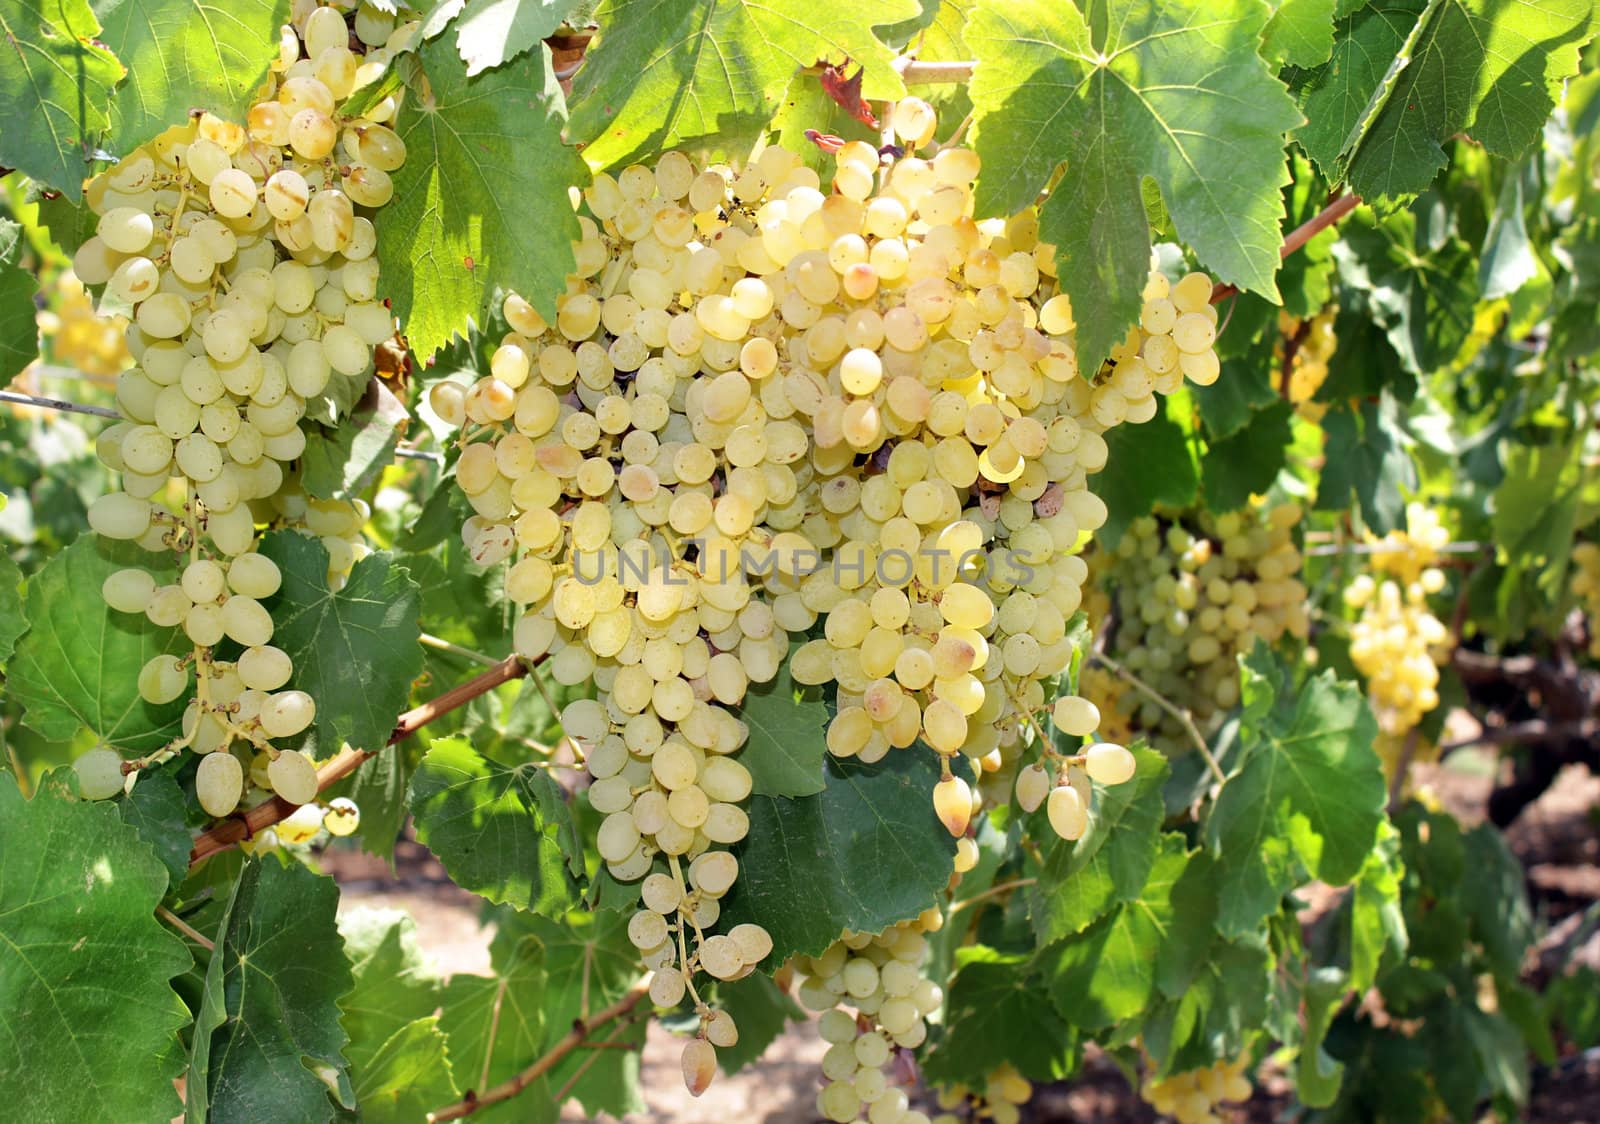 clusters of ripe green grapes before harvesting